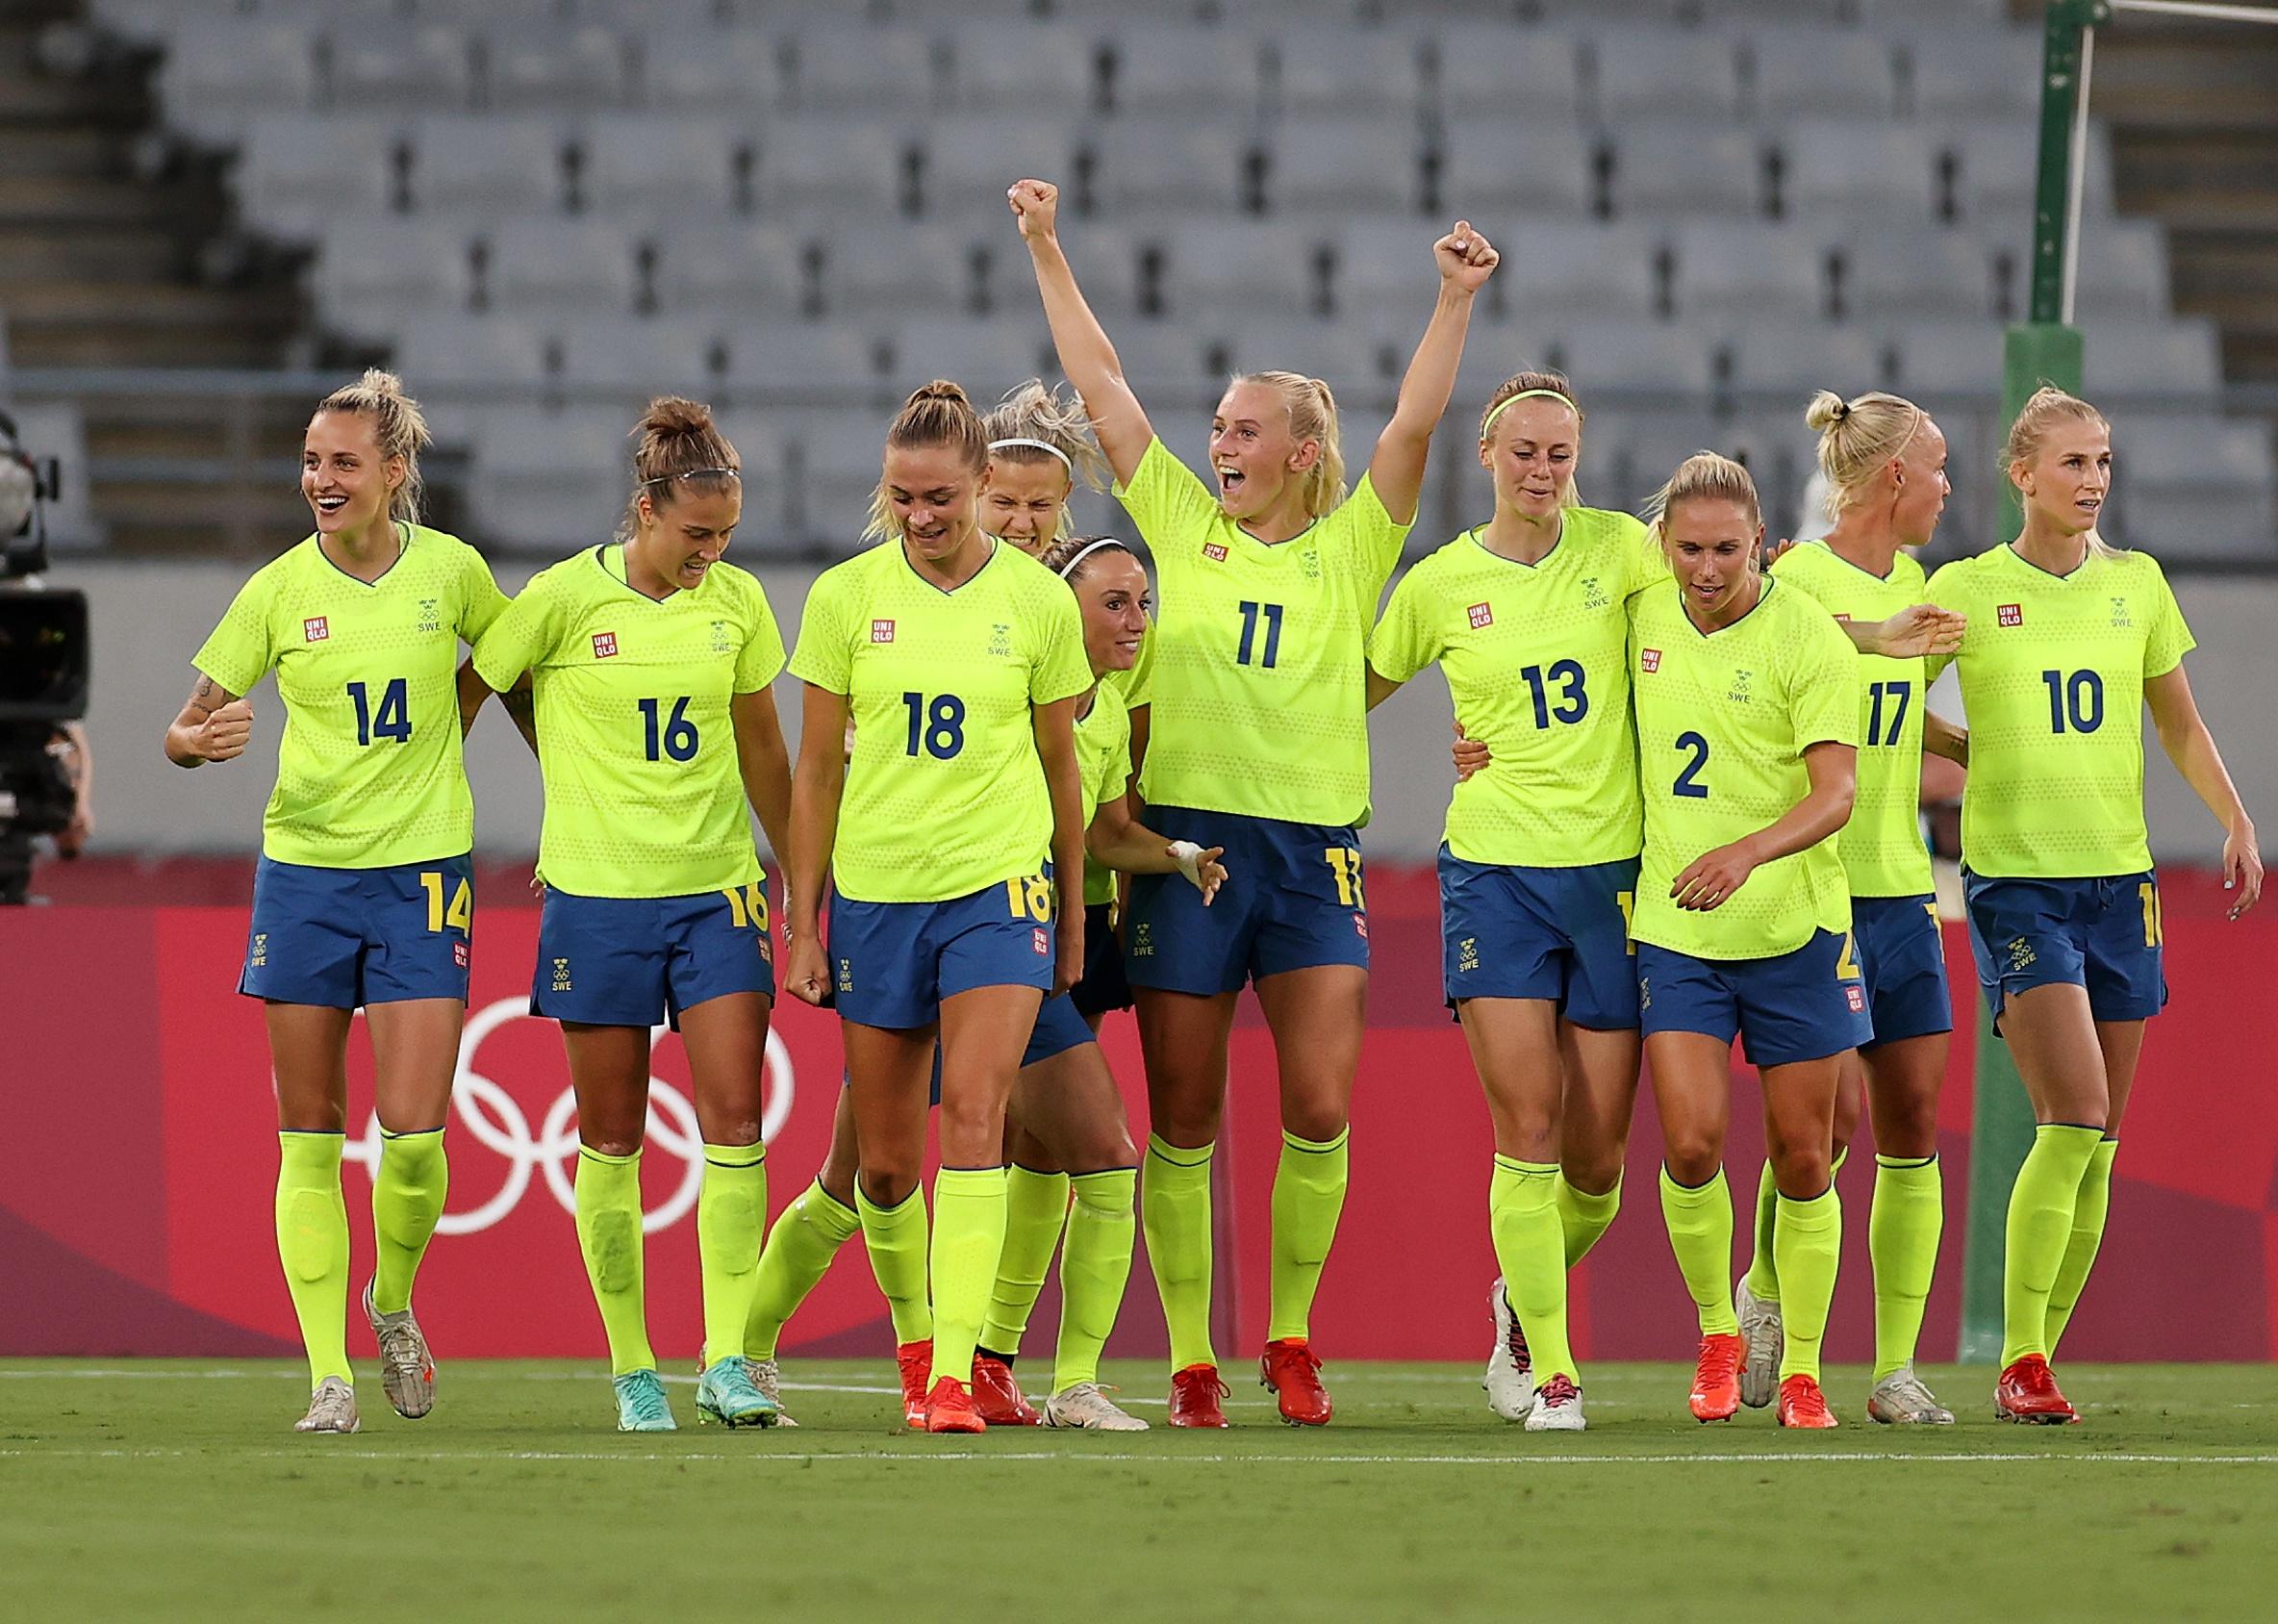 Stina Blackstenius of Team Sweden celebrates with team mates after scoring during the Women's First Round Group G match.